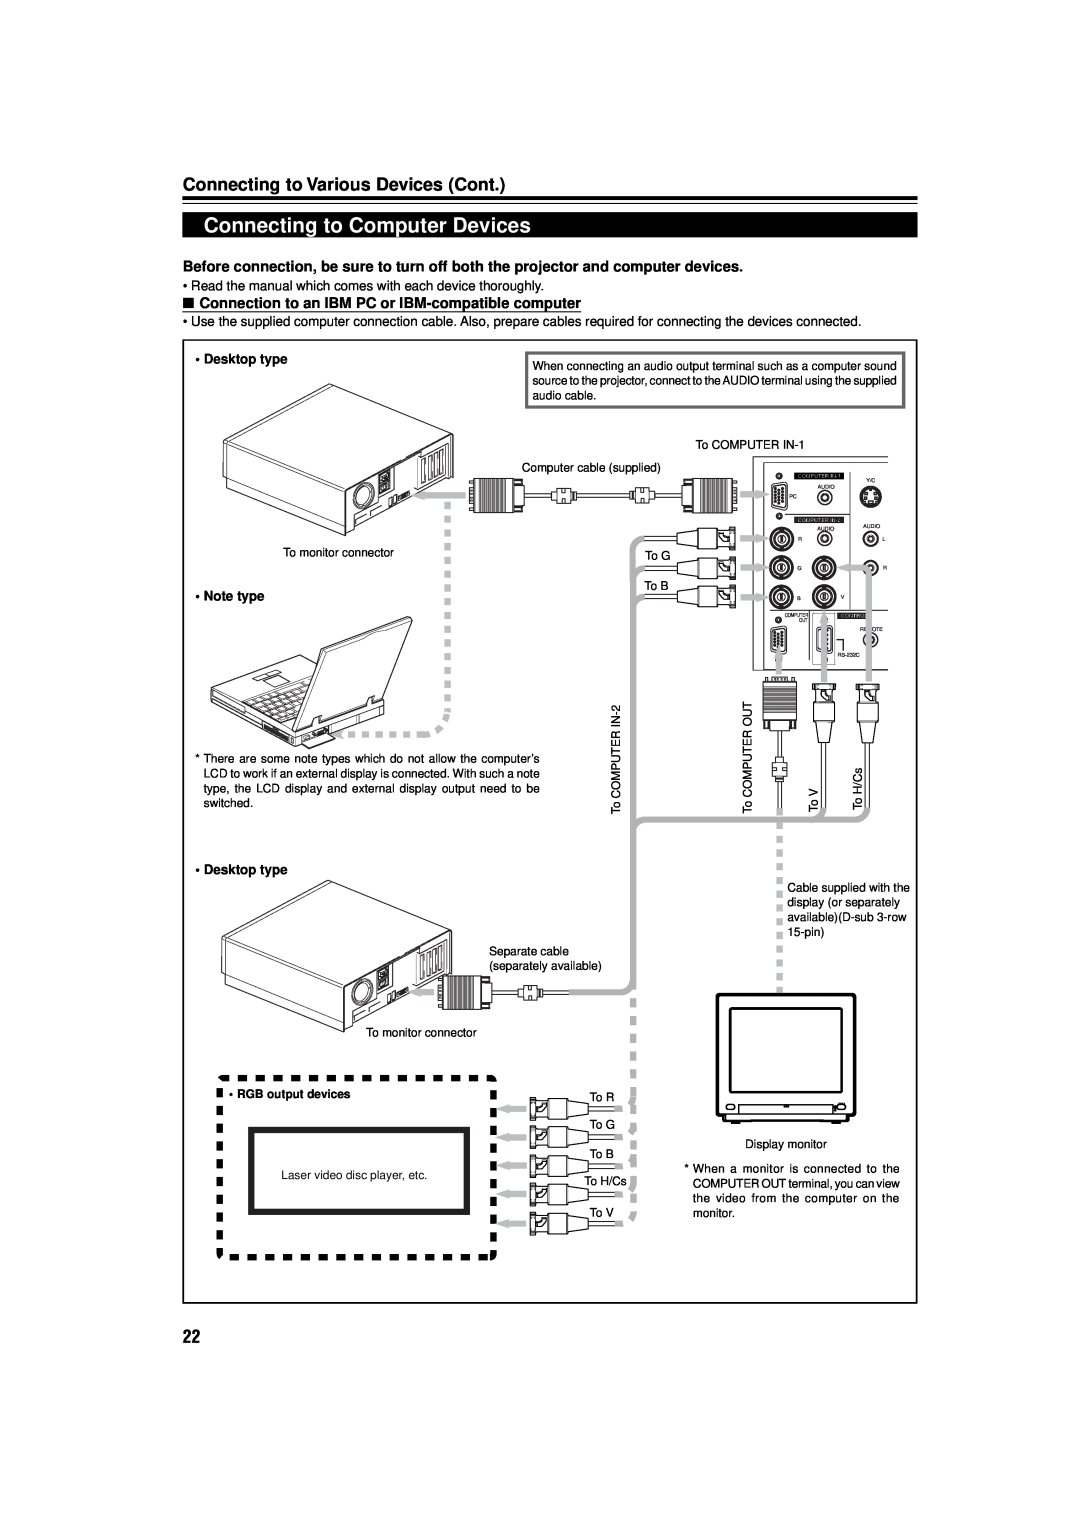 JVC DLA-M15U manual Connecting to Computer Devices, Connecting to Various Devices Cont, Desktop type, Note type 